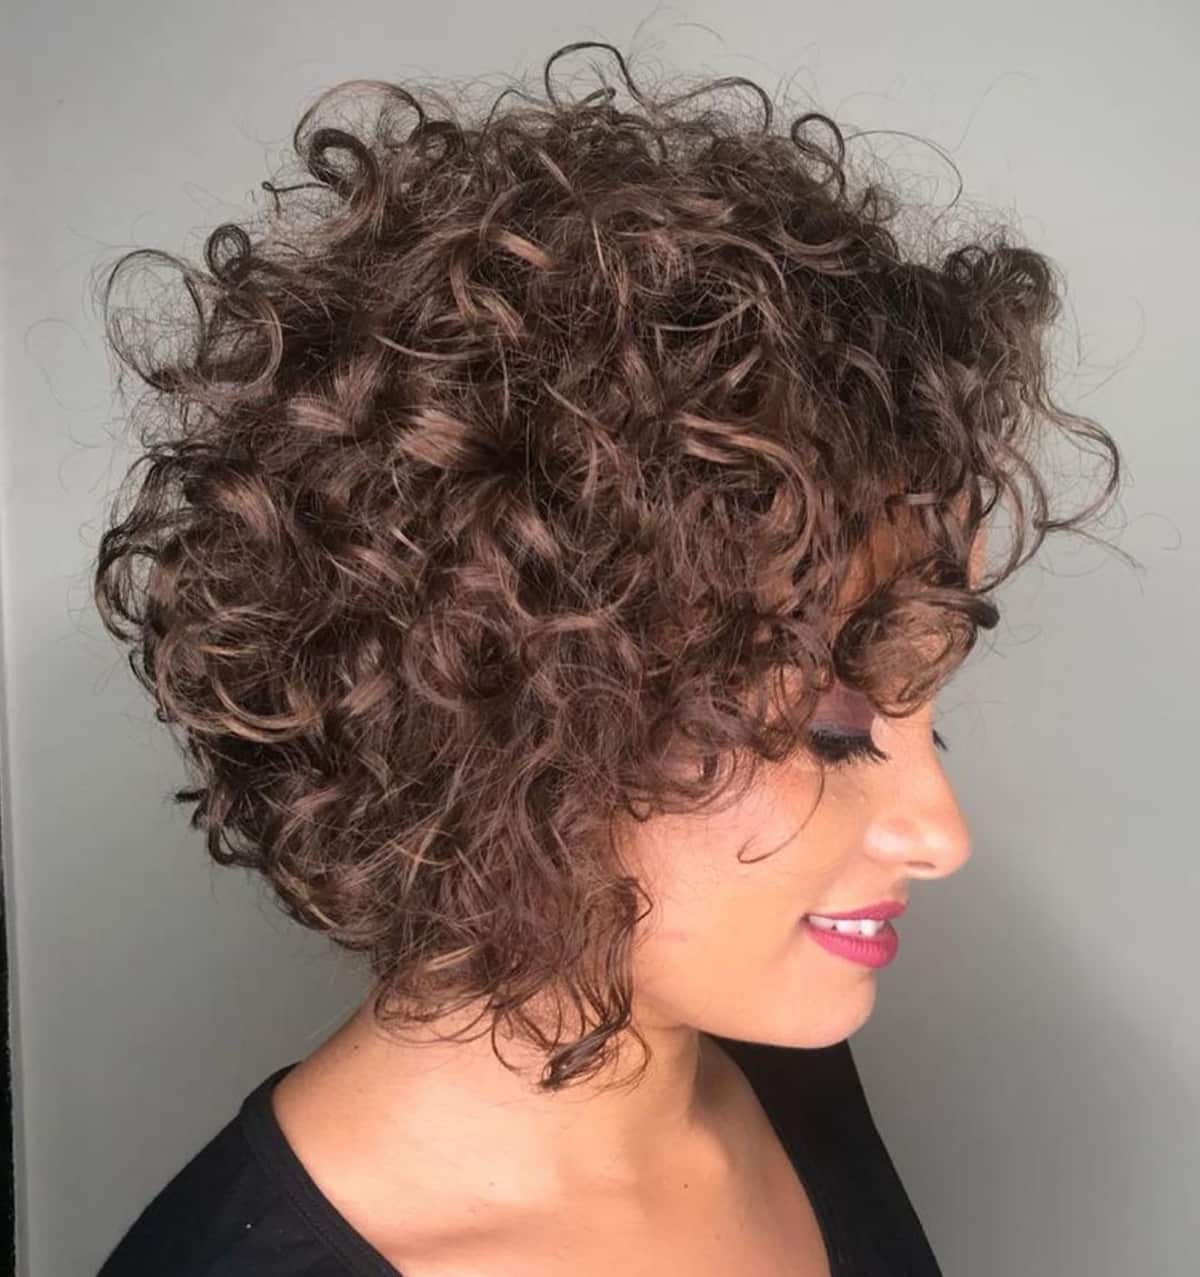 The Best Hairstyles for Short Curly Hair | Nutrafol